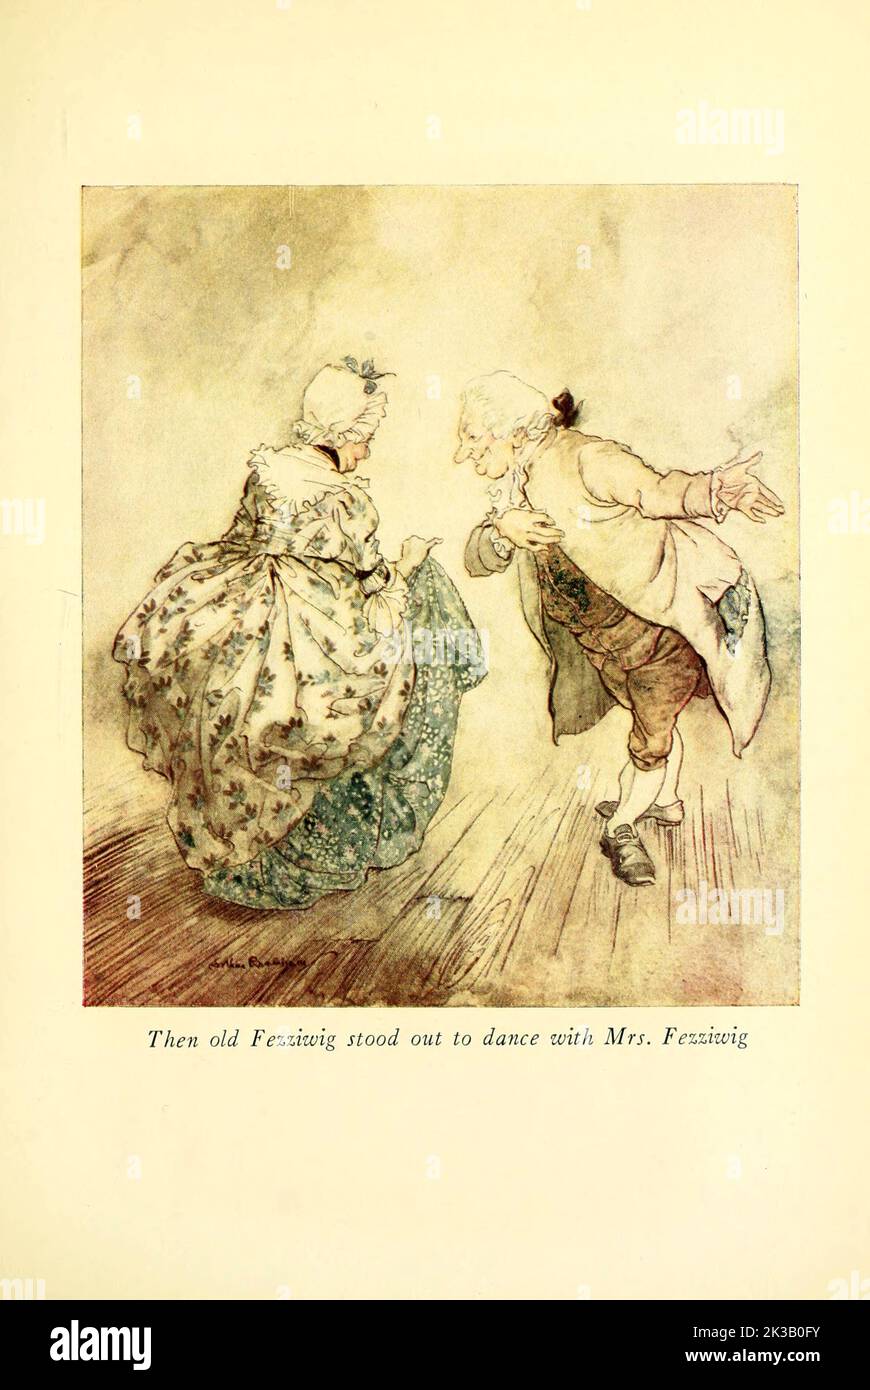 Then old Fezziwig stood out to dance with Mrs. Fezziwig Illustrated by Arthur Rackham from the book ' A Christmas carol ' by Charles Dickens, Publication date 1915 Publisher London : William Heinemann ; Philadelphia : J.B. Lippincott Co. Stock Photo